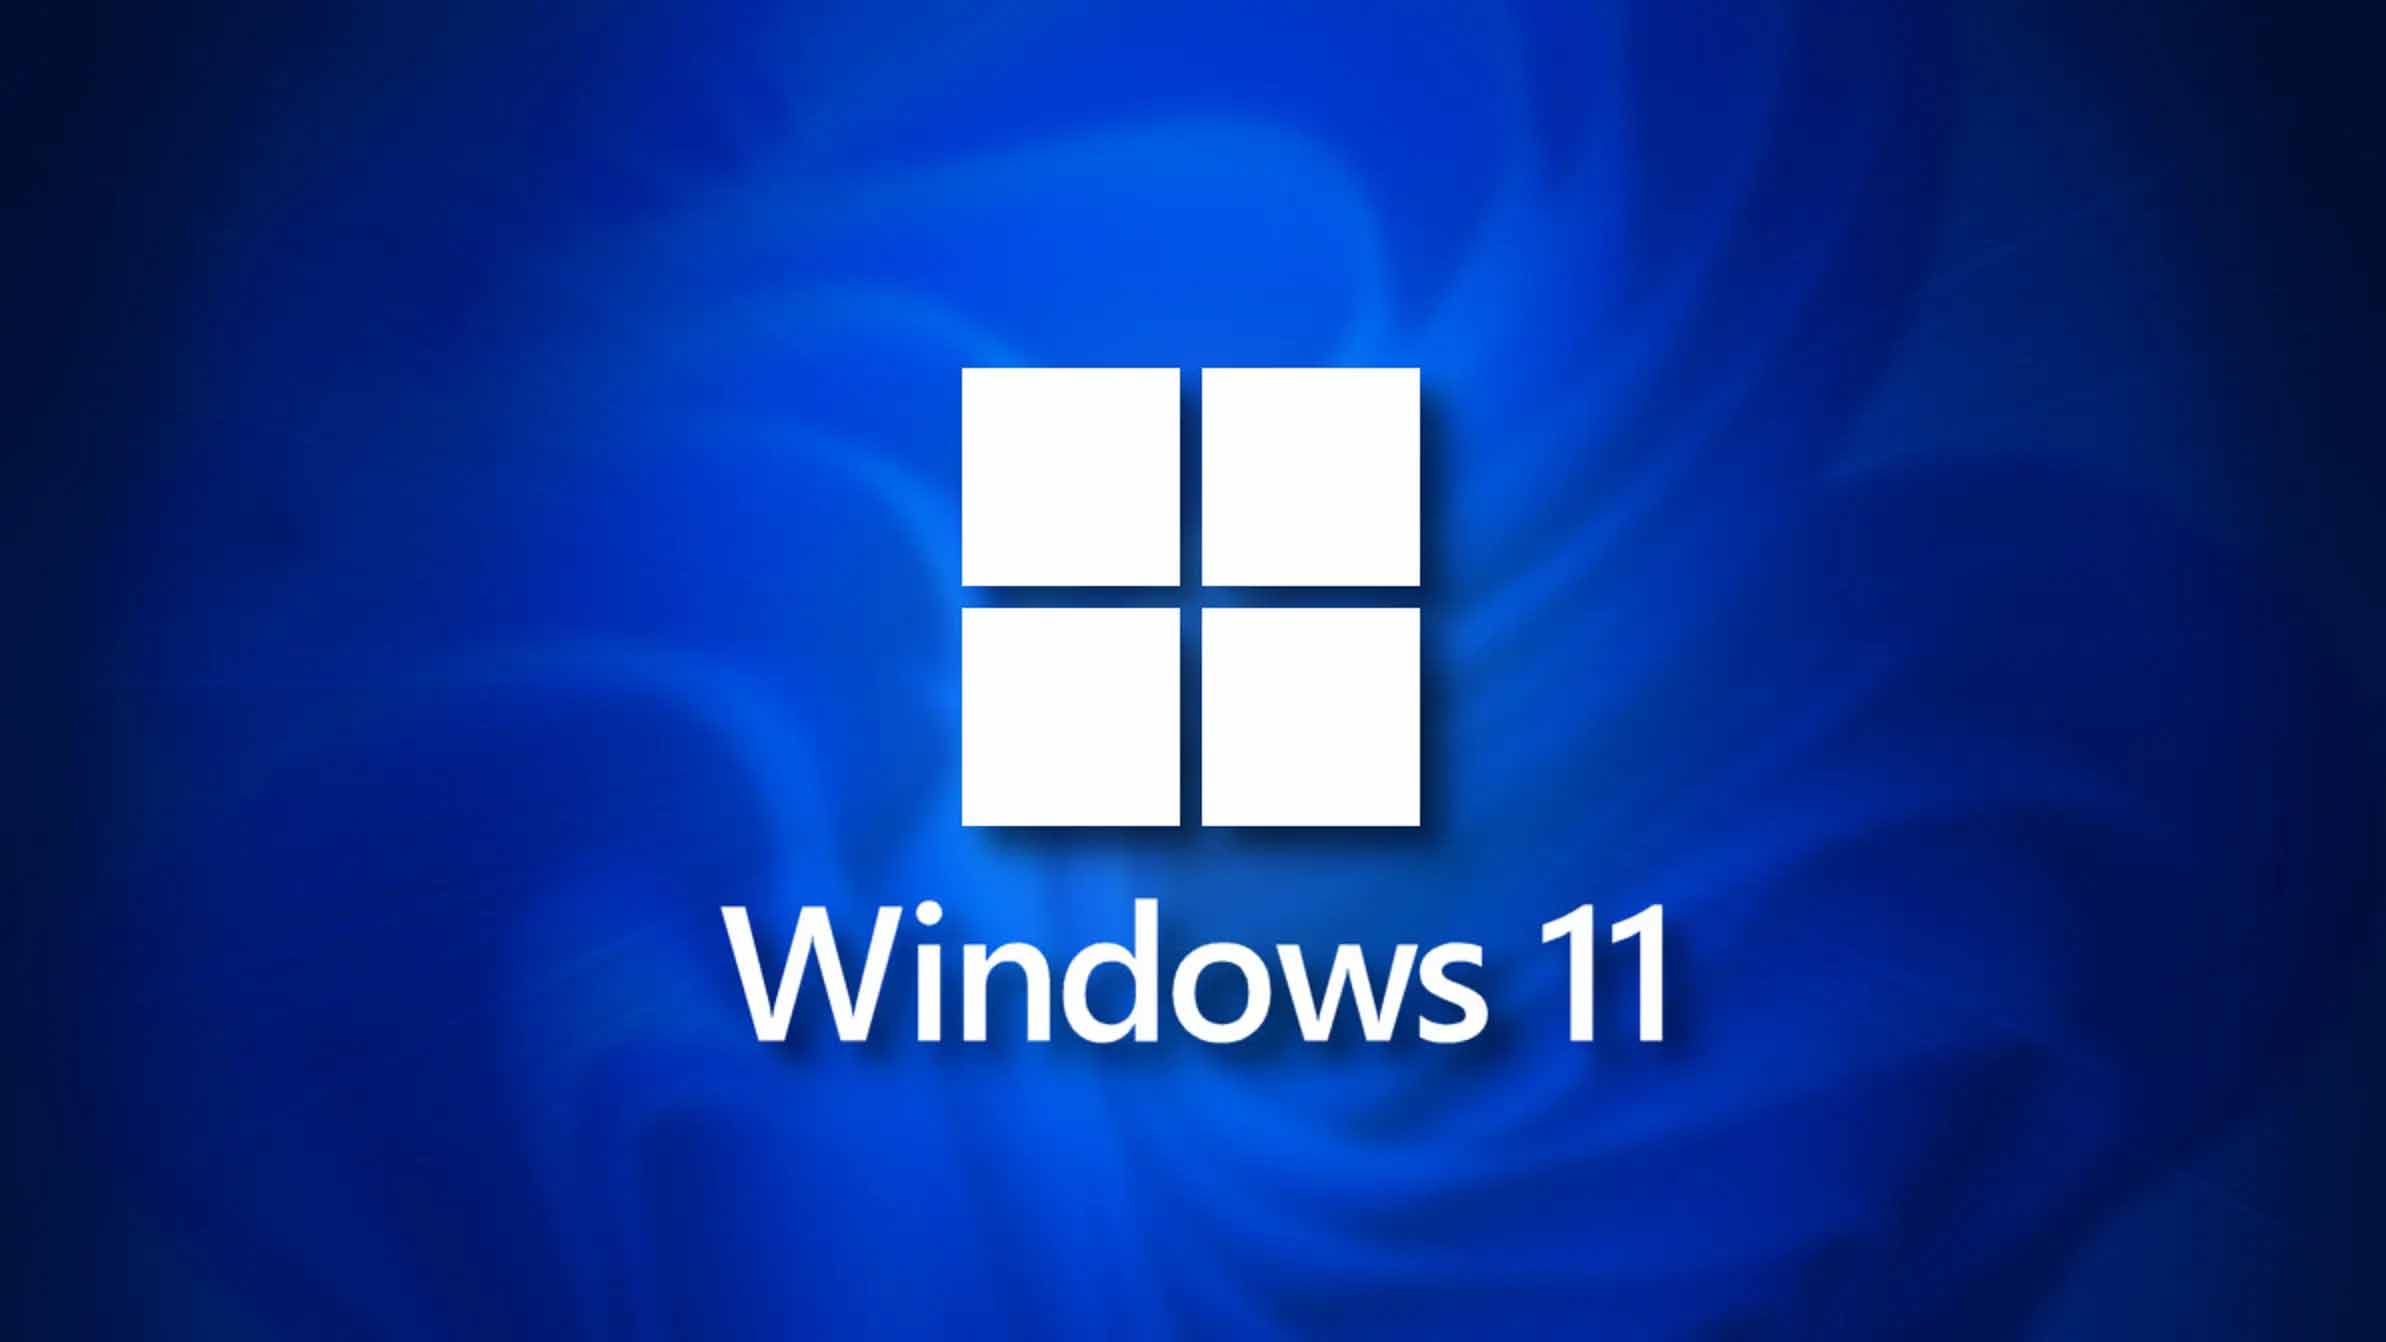 How to Upgrade Windows 10 to Windows 11 For Free